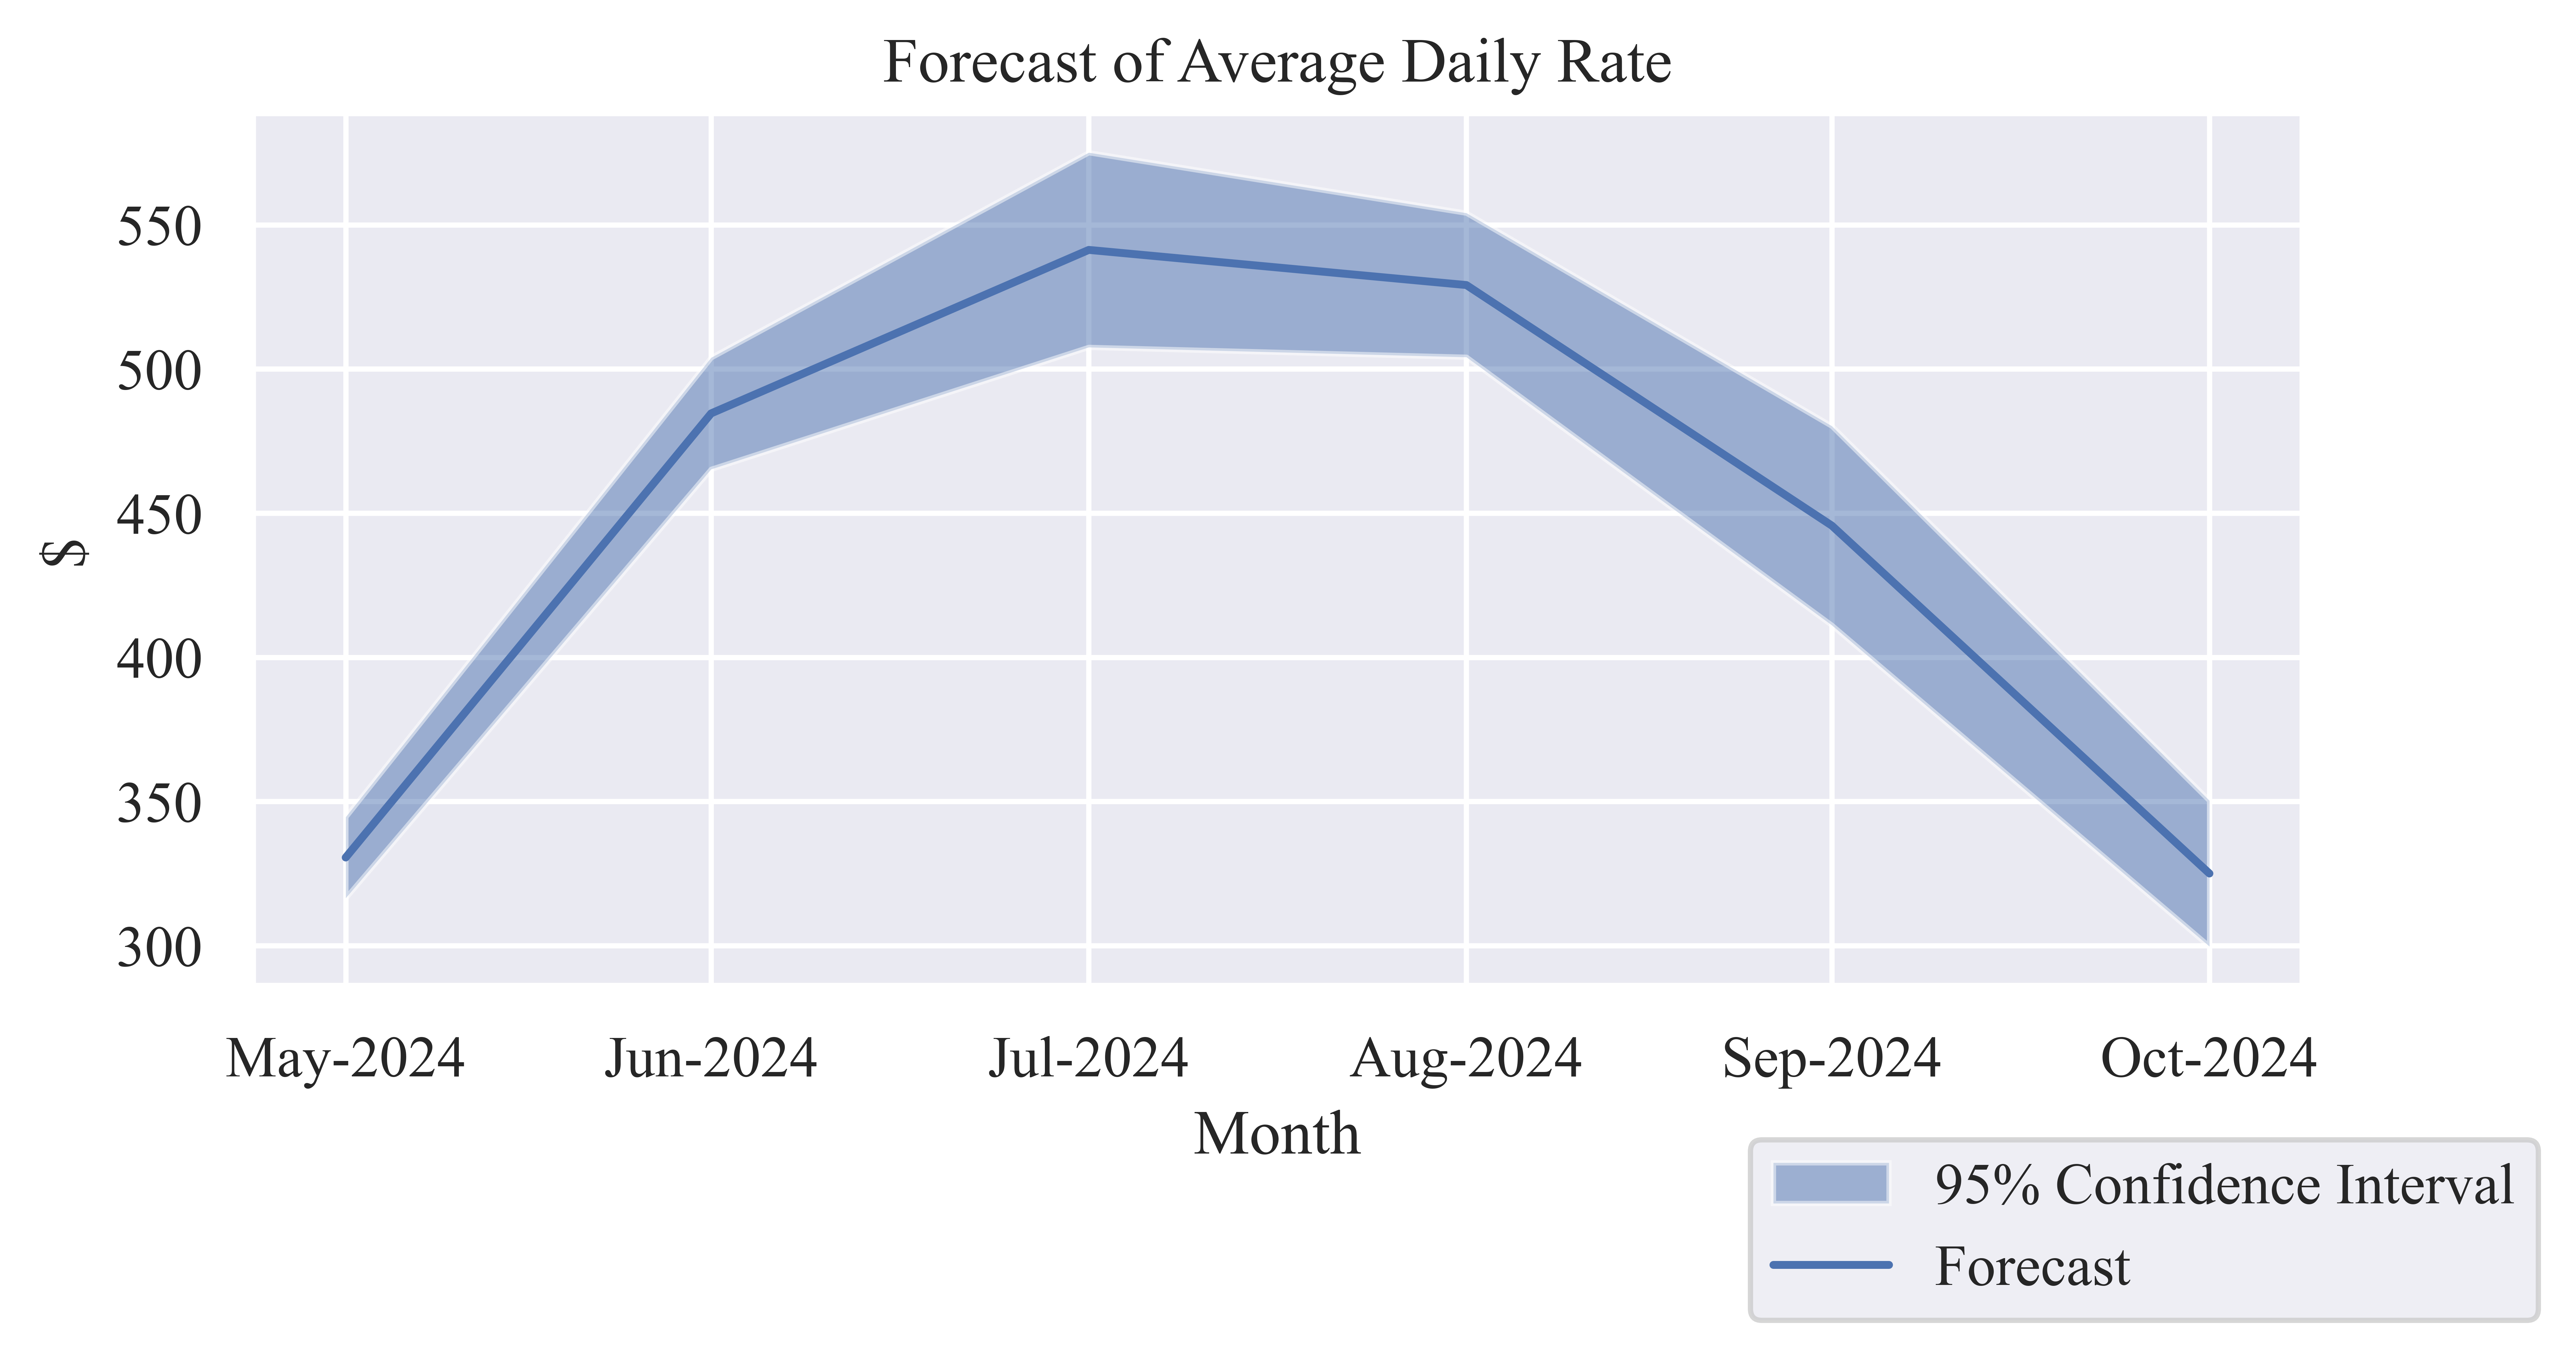 Average Daily Rate (ADR)